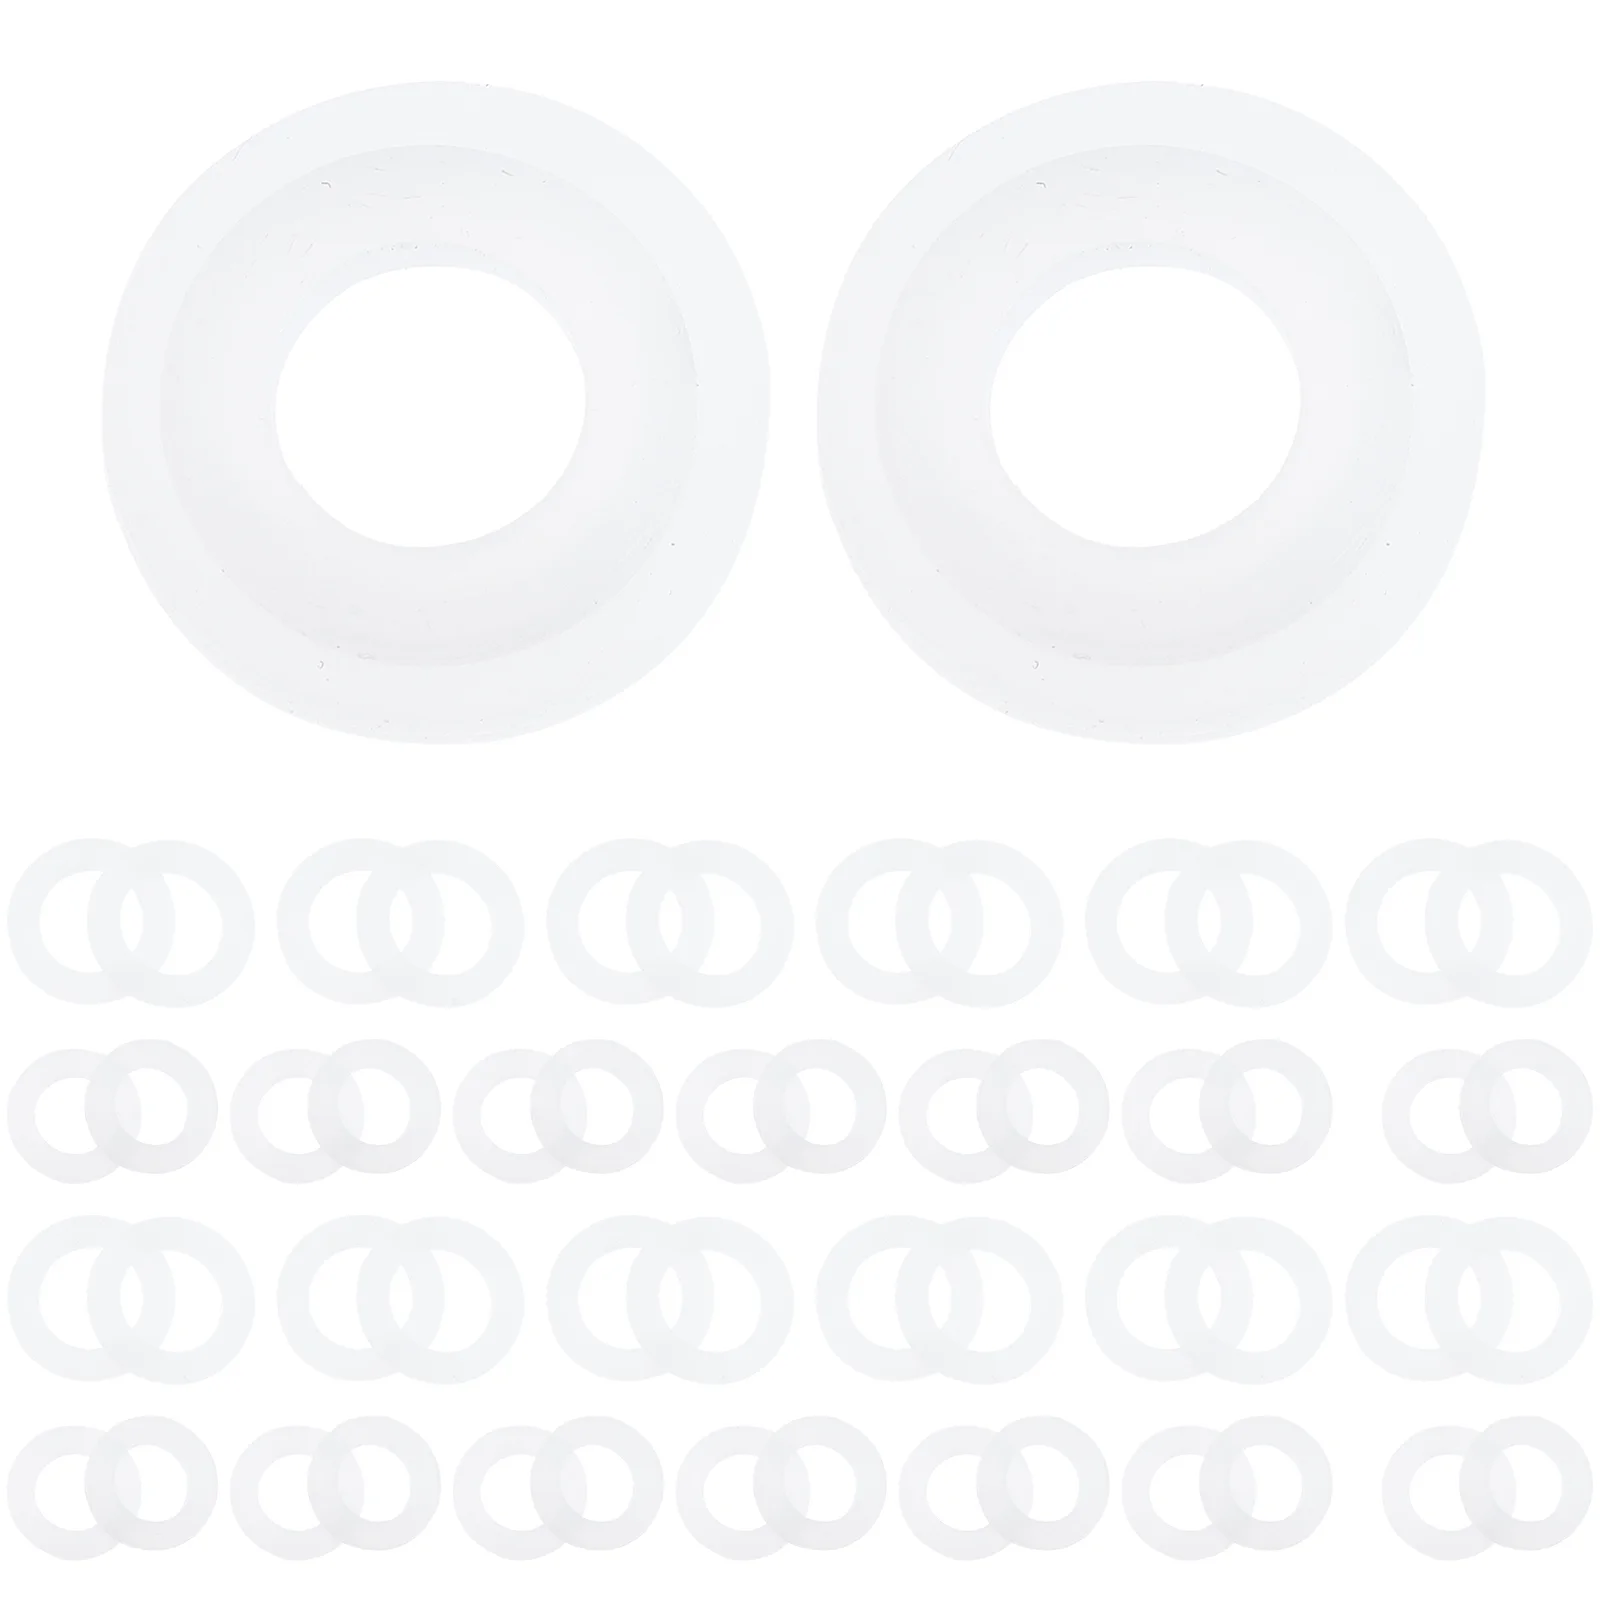 

O-ring Silicone Gasket Garden Washer Household PTFE Pad Washers Sealing Assortment Silica Gel